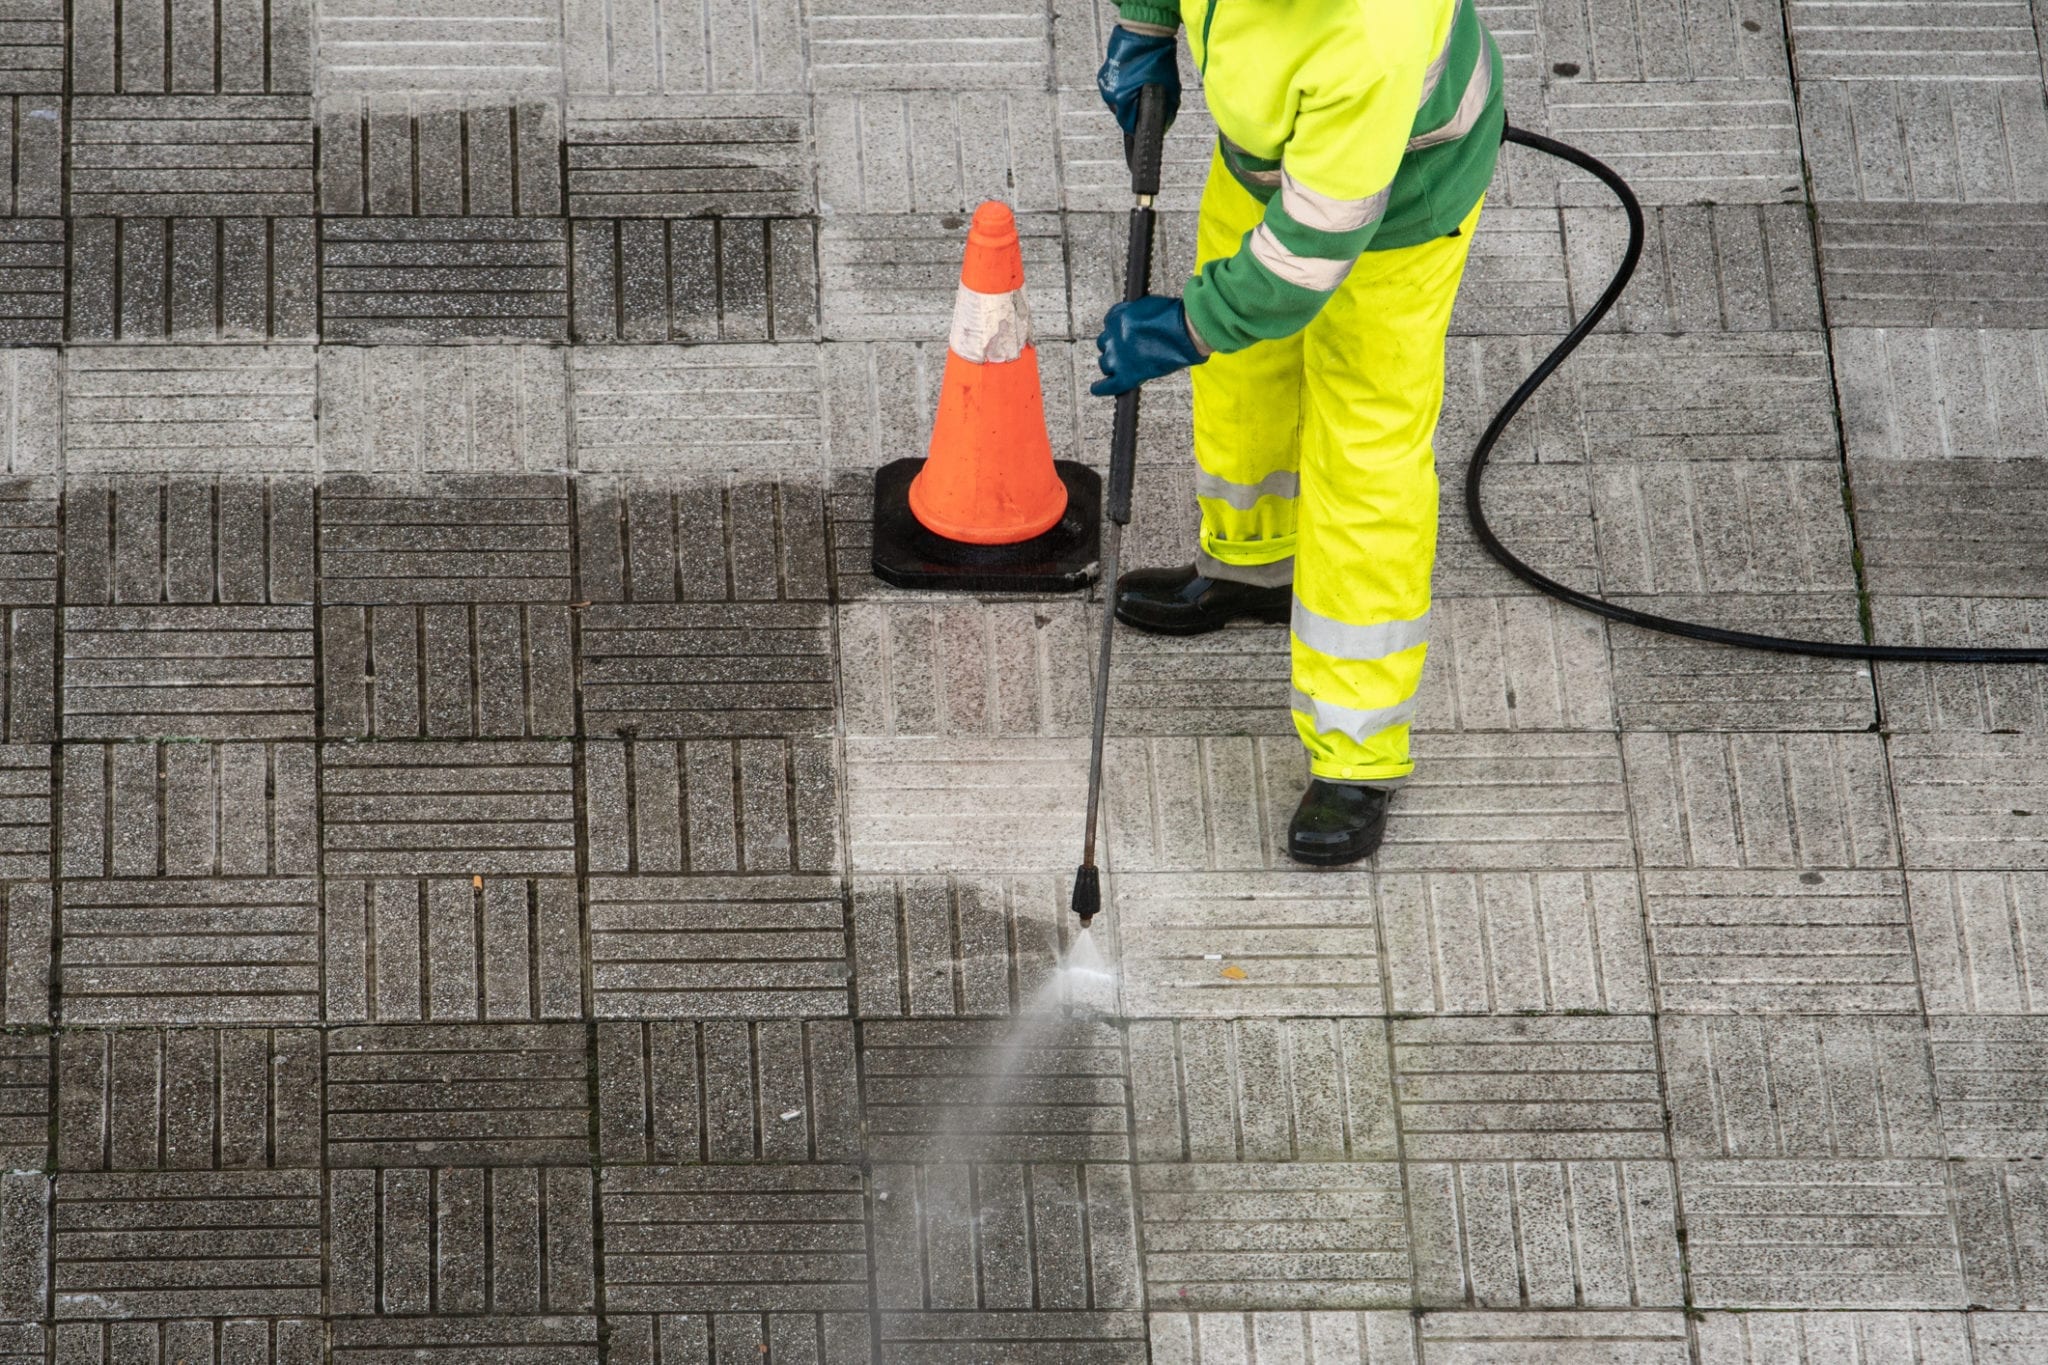 Man in high vis uniform with a power washer, spraying flag stones